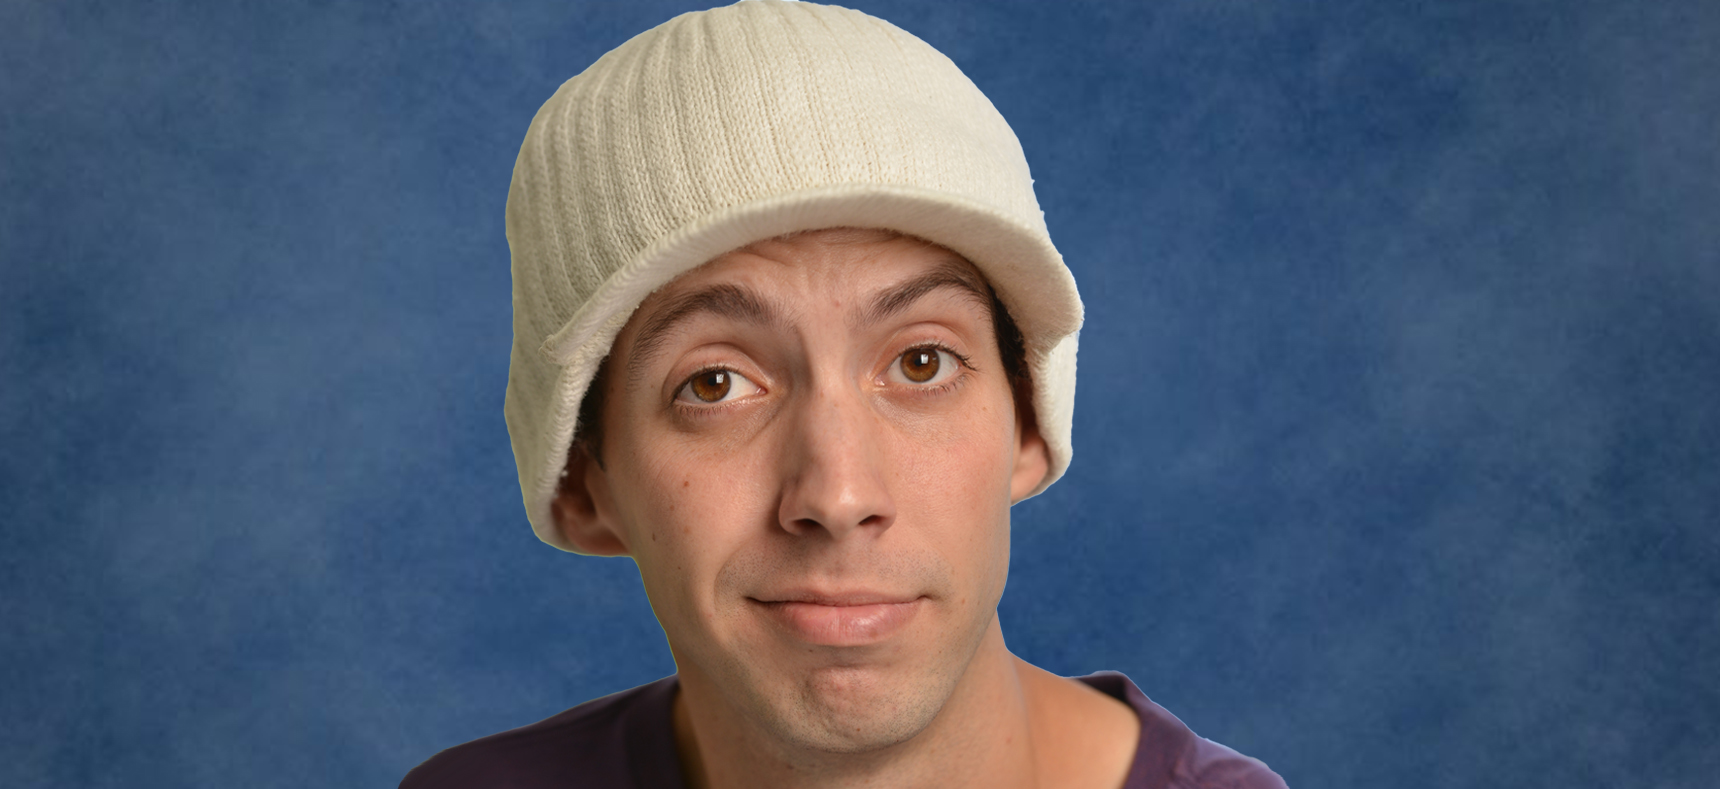 This Friday night at Comedy Heights at Bay Bridge Brewing we bring you the hilarious Daniel Eachus.